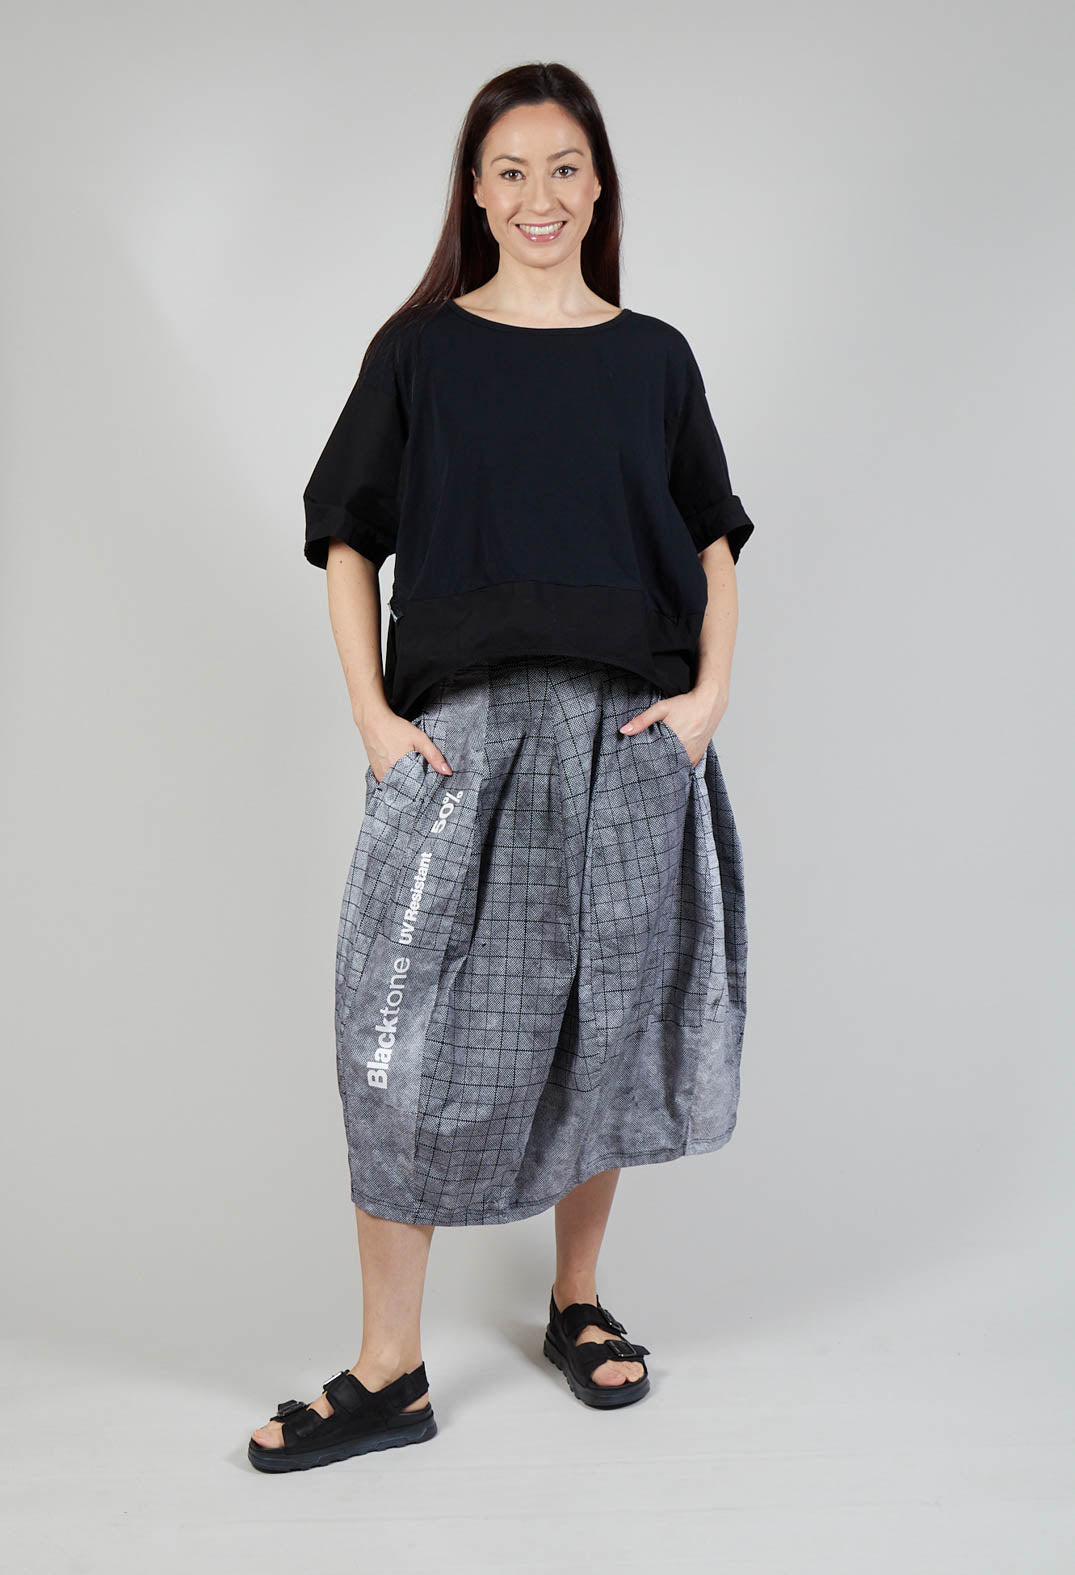 Pull On Tulip Skirt in Placed Black Print